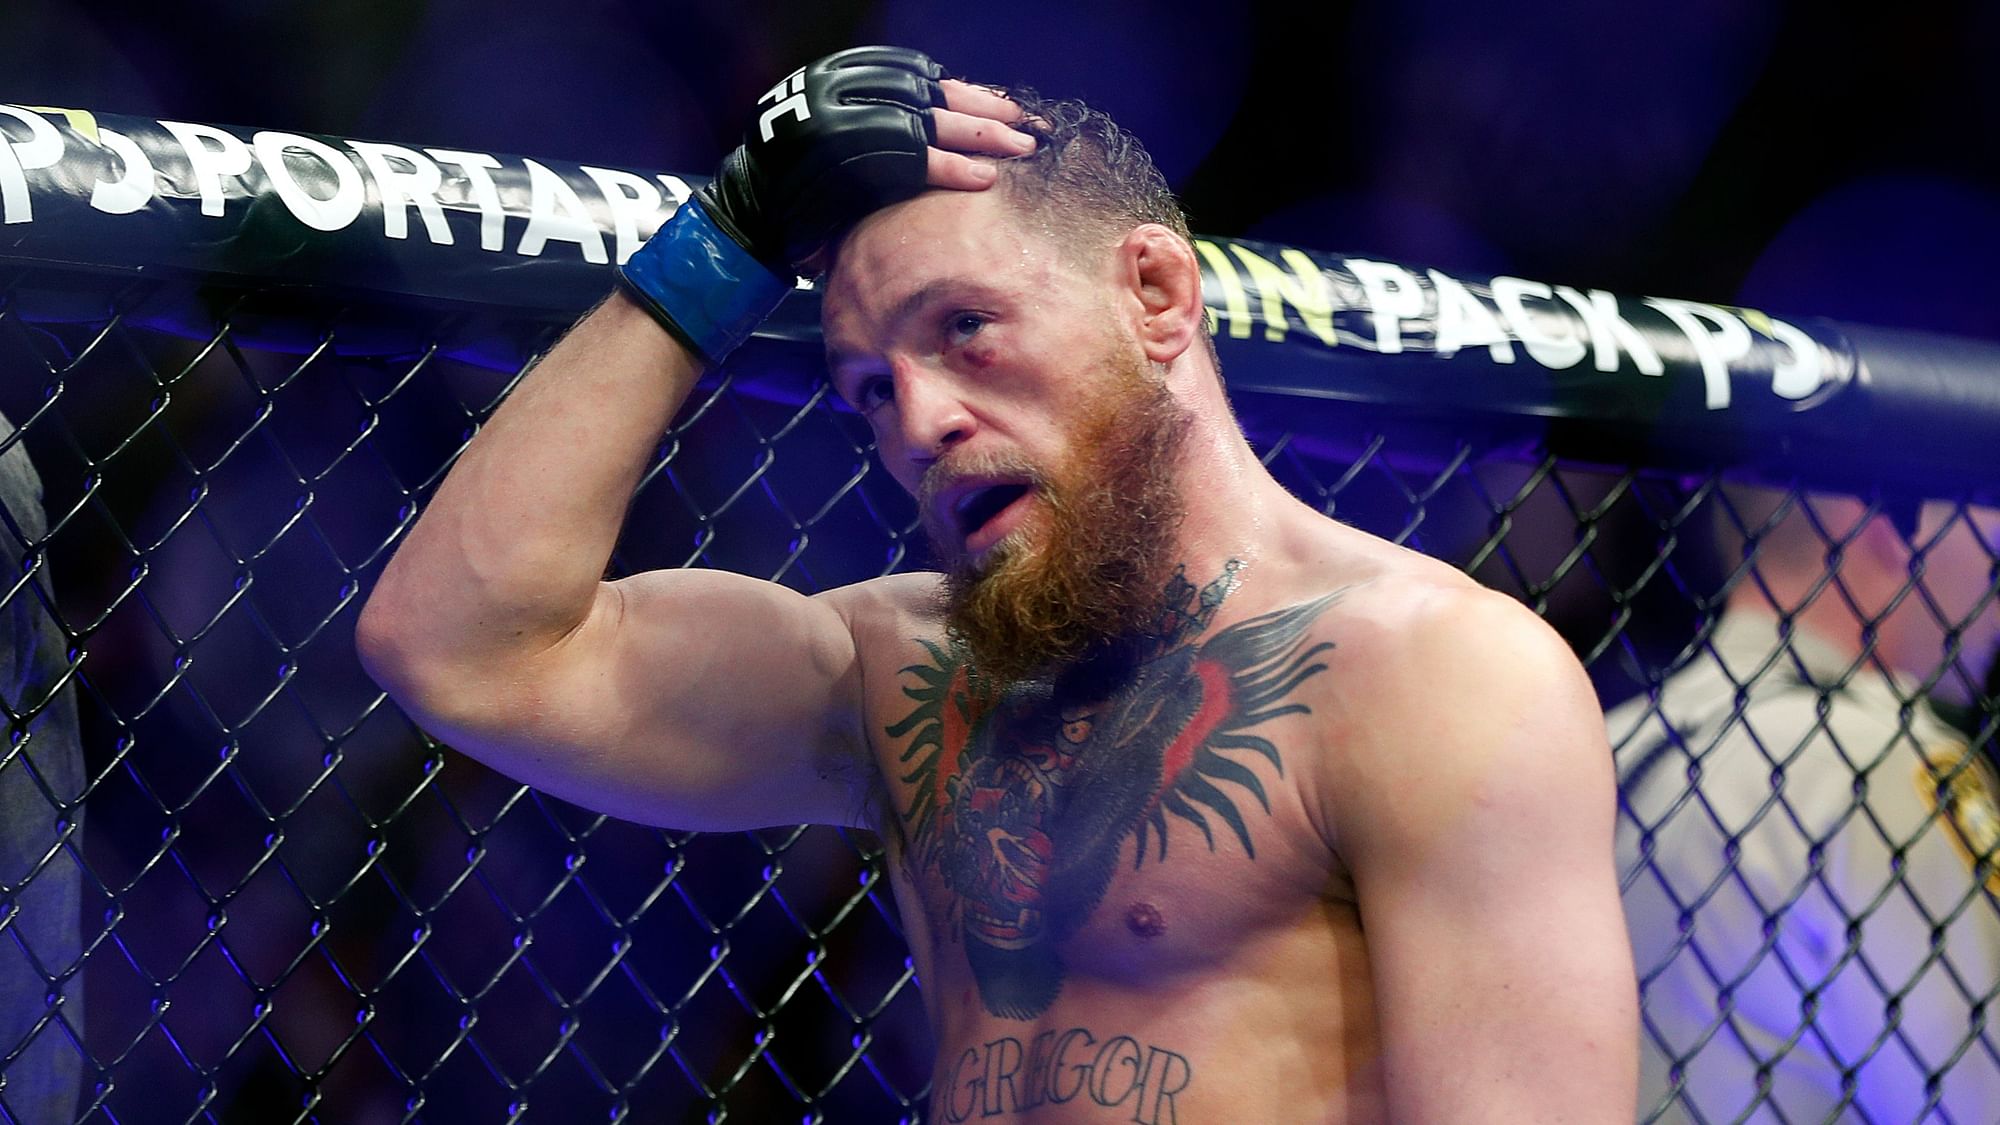 Conor McGregor said last week he was quitting mixed martial arts.